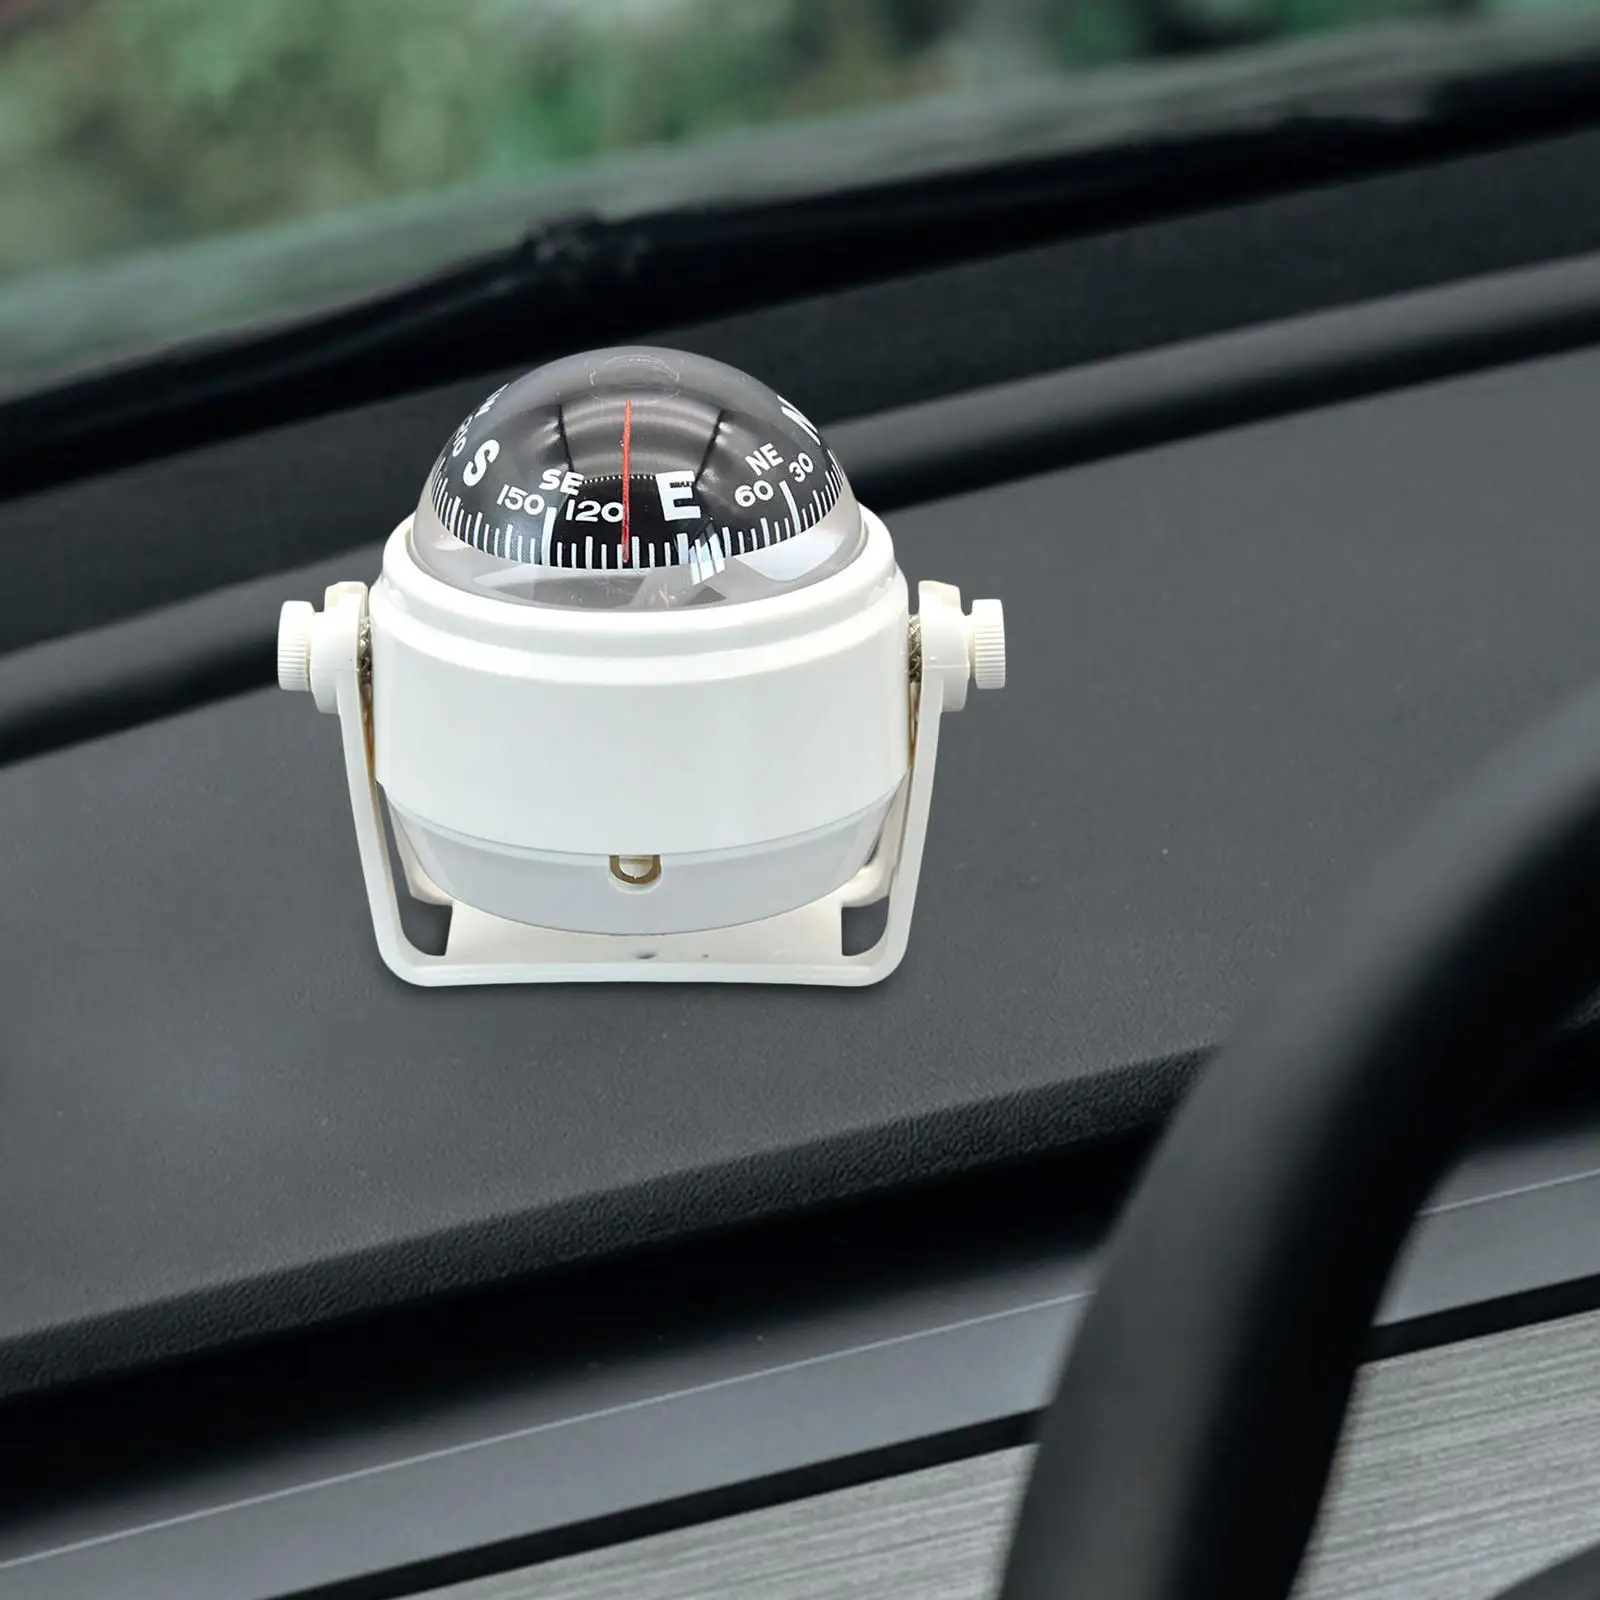 Car Compass Ball Adhesive Navigation Direction Guide for Marine Boat